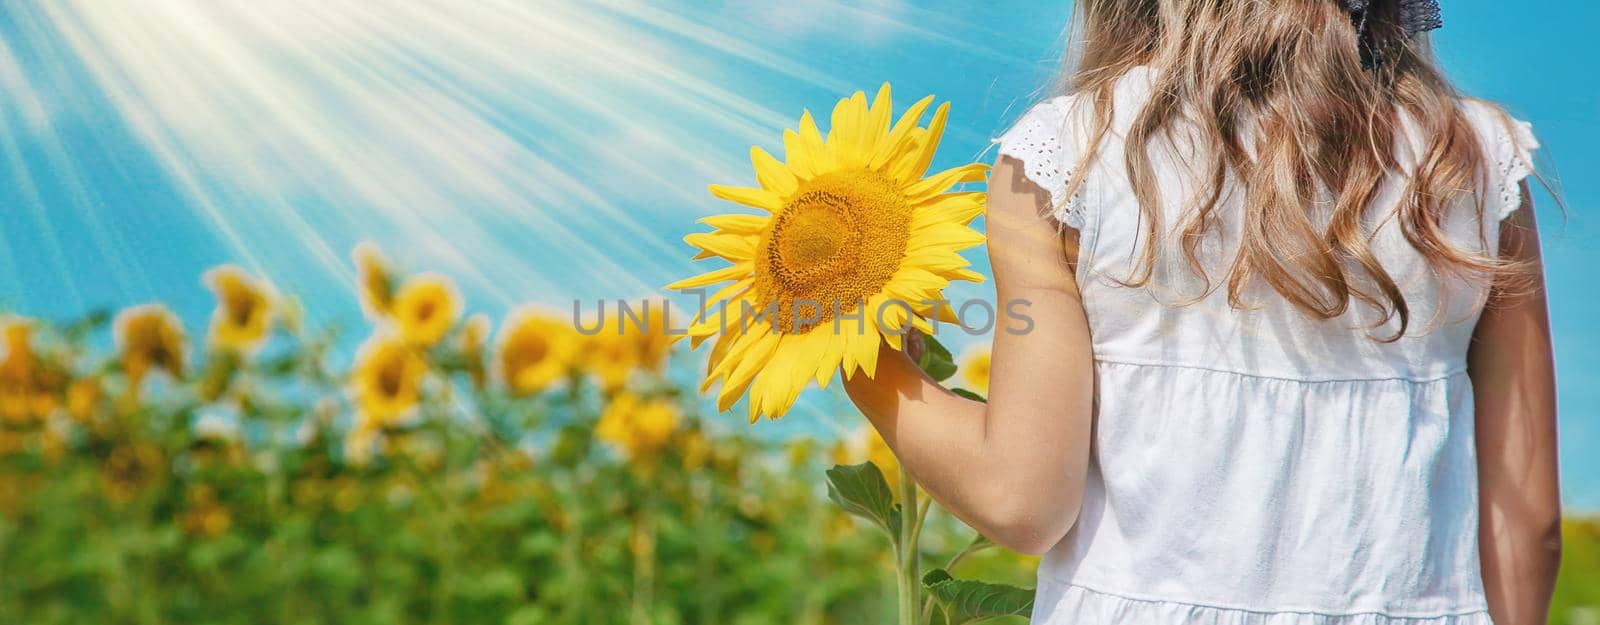 A child in a field of sunflowers. Selective focus. by yanadjana